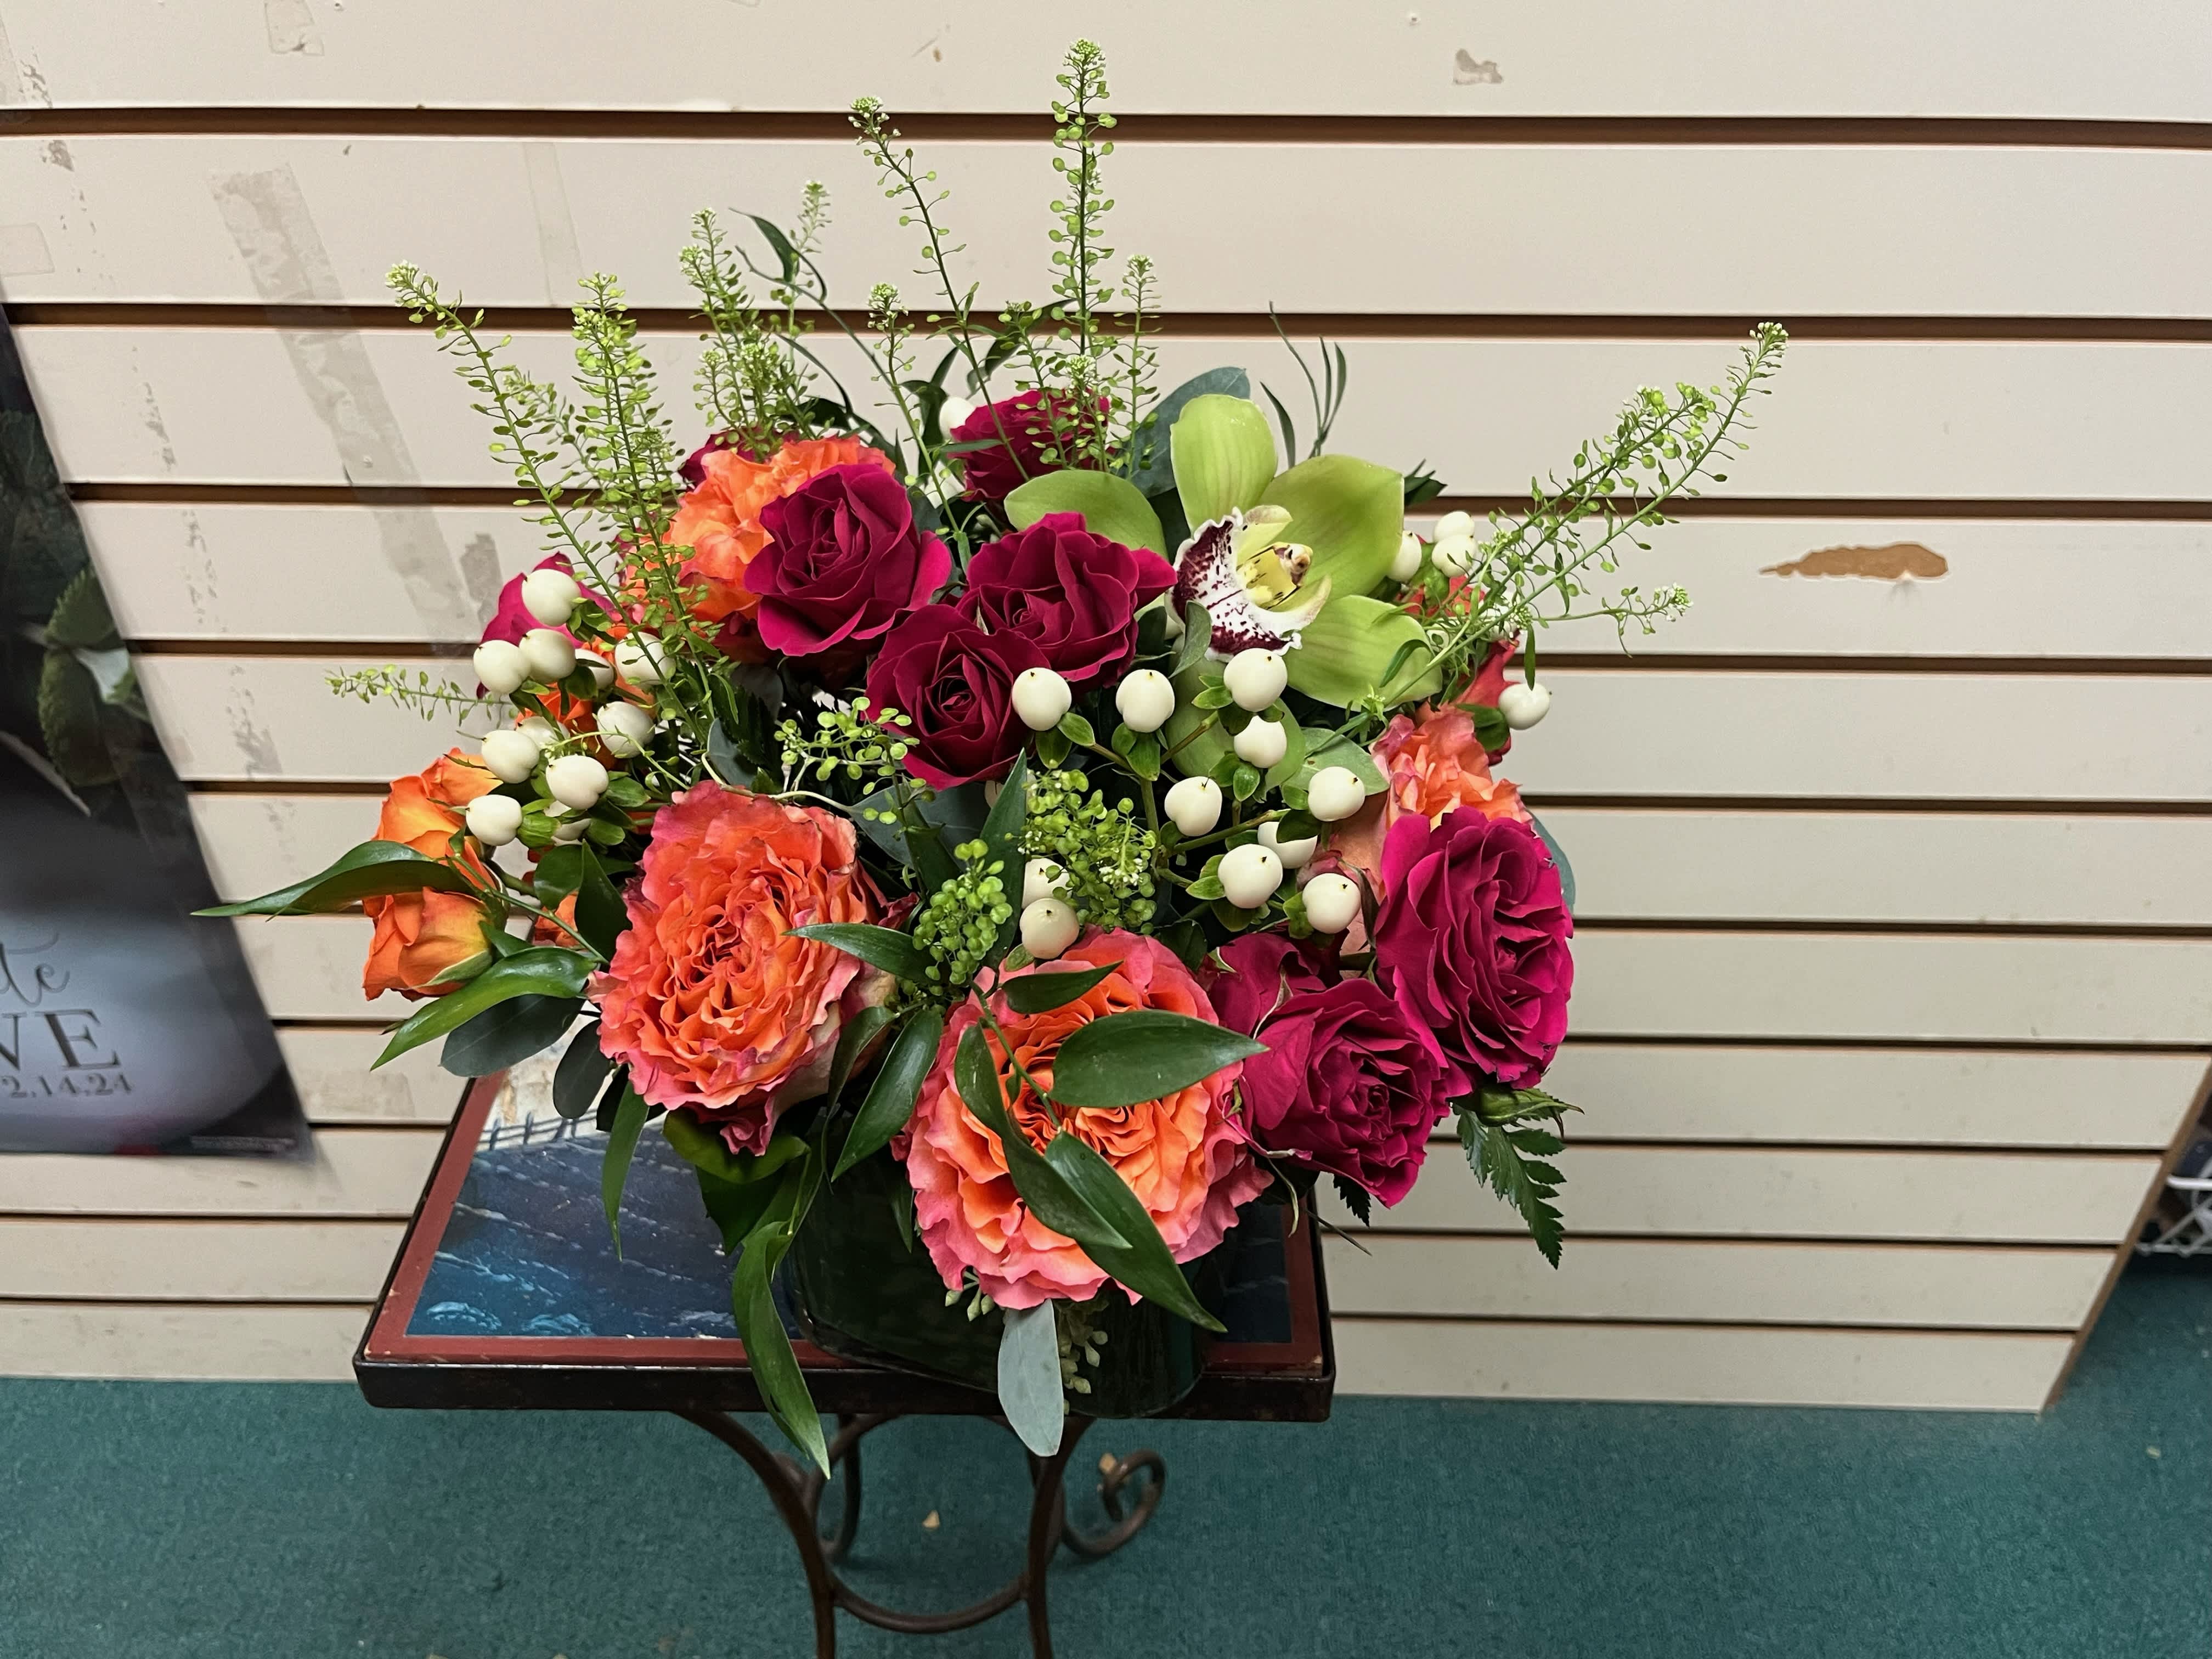 Sunset by Ashley's  - Assorted hot pinks and oranges roses and spray roses with accents of greens flowers and fillers in a cube with mixed greens  